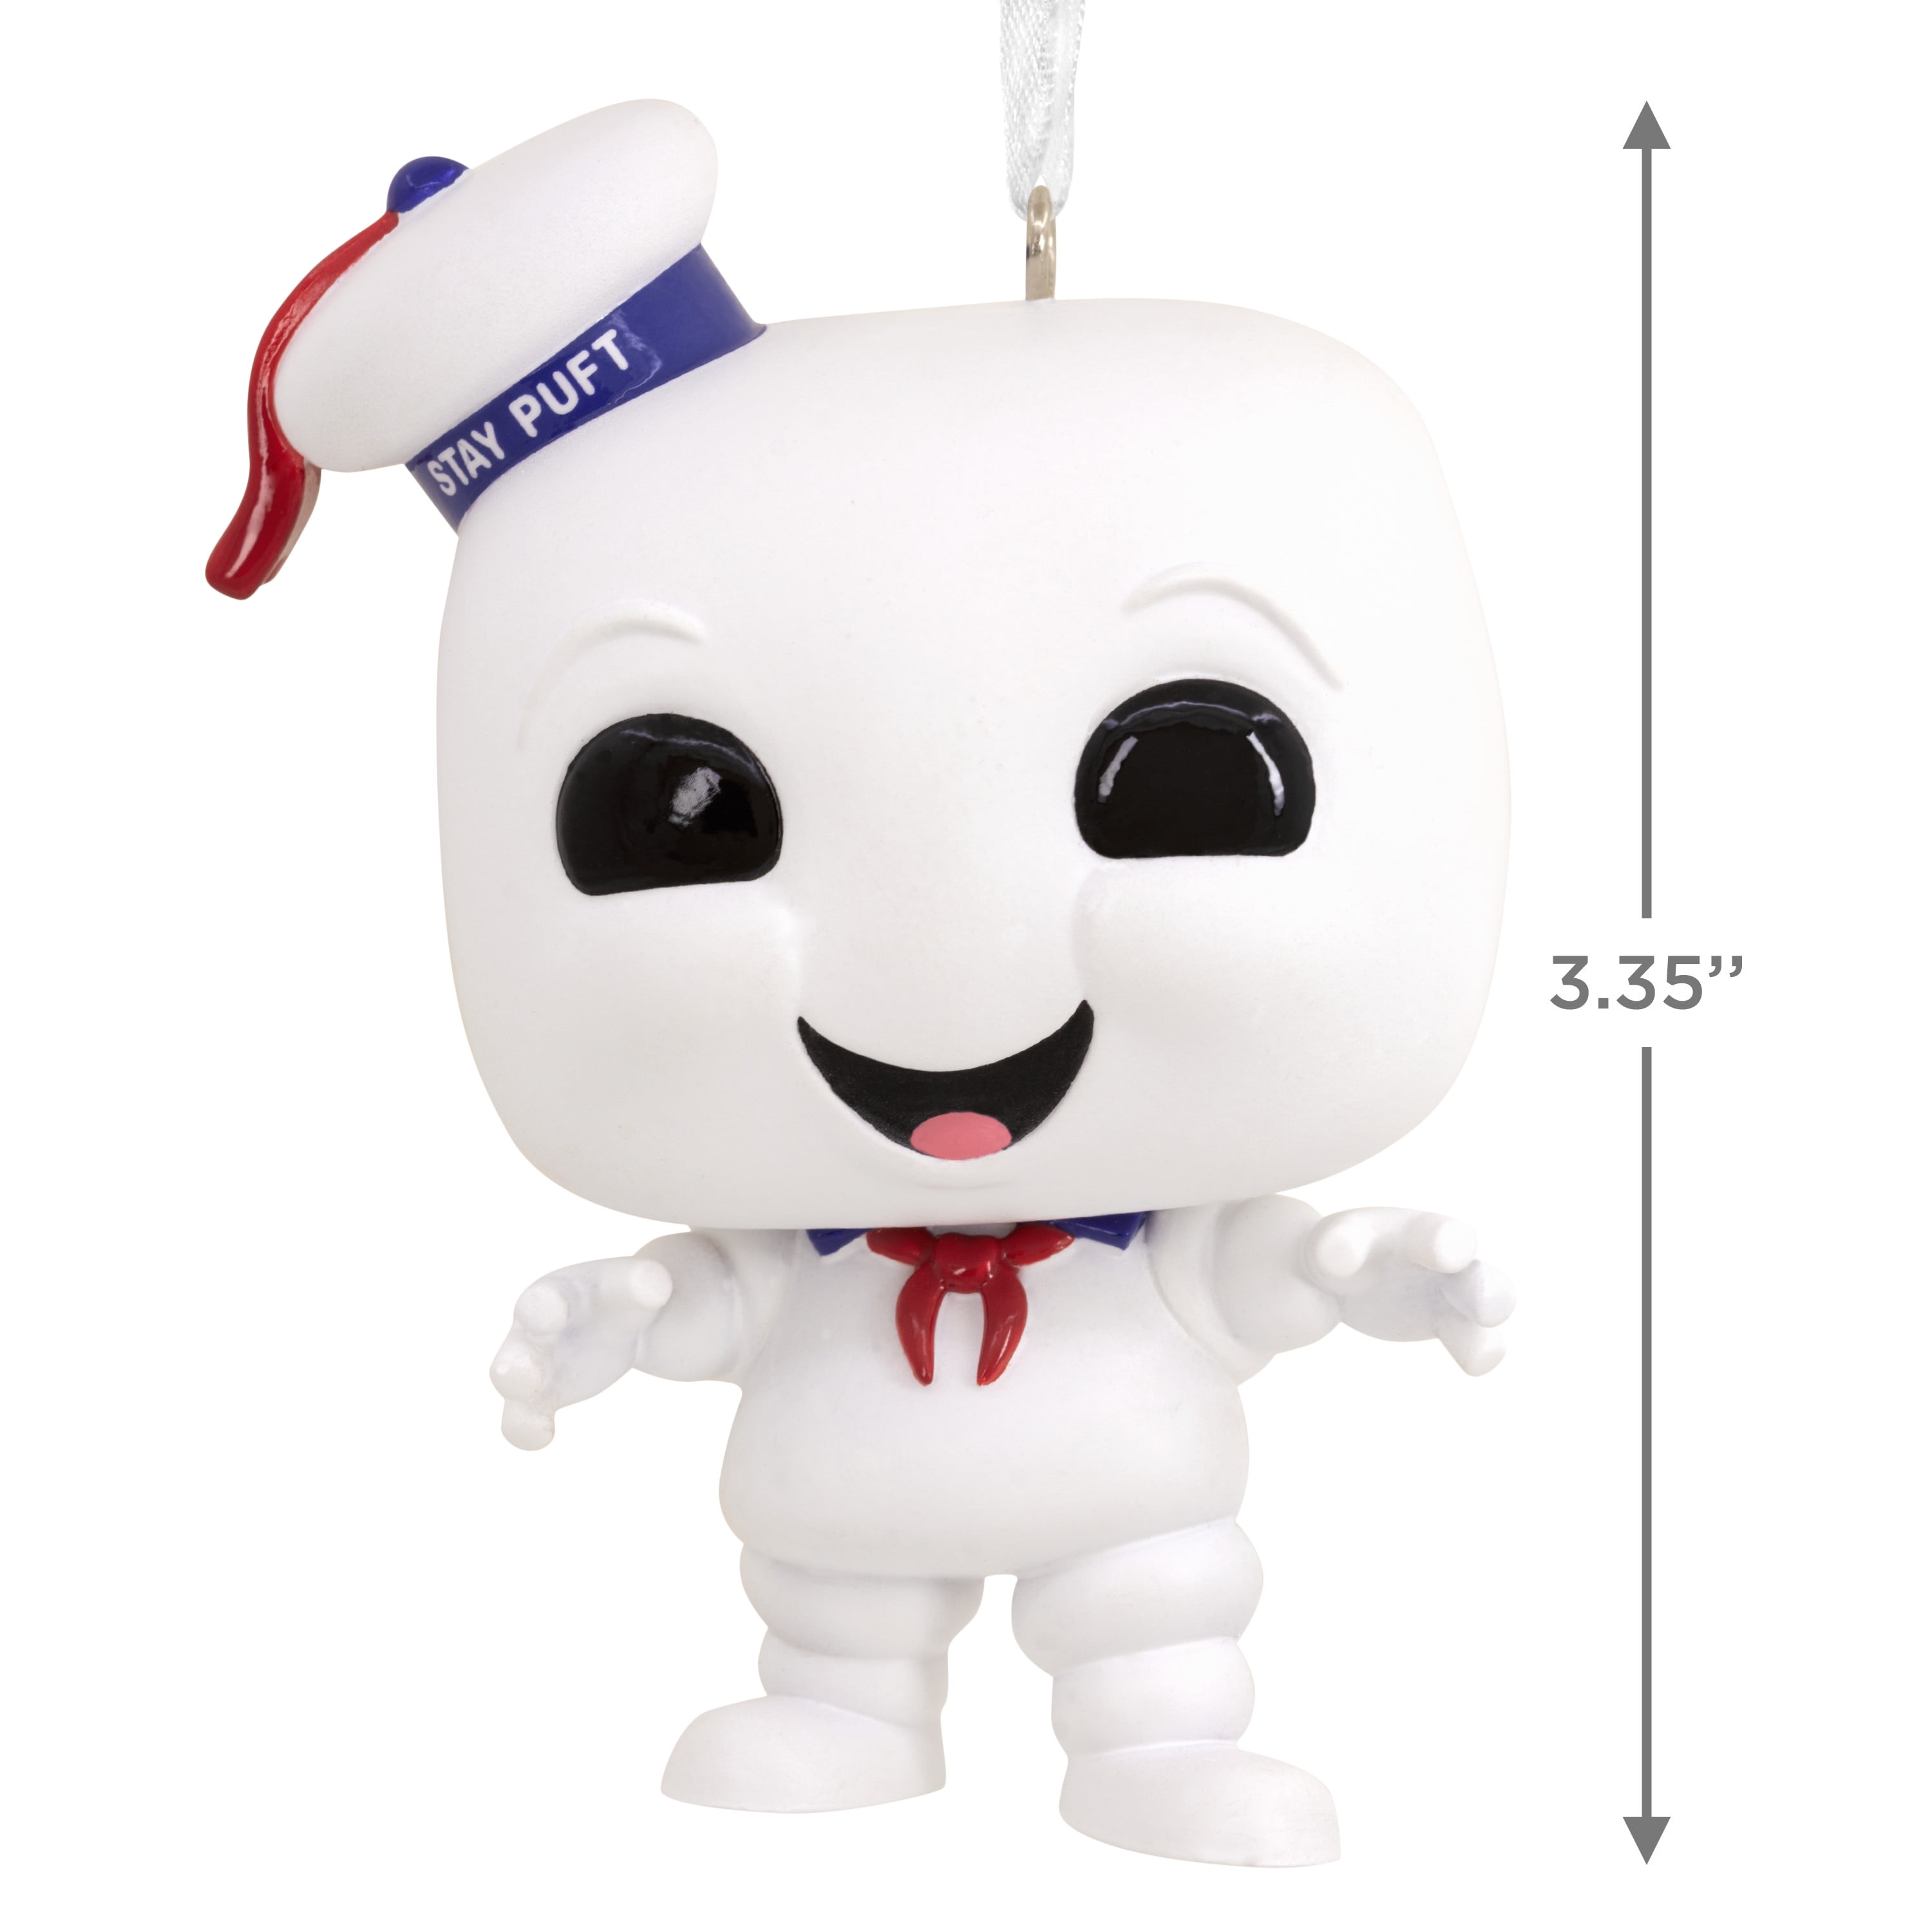 Classic Ghostbusters 4 inch Talking Smiling Stay Puft Marshmallow Man Plush Clip 